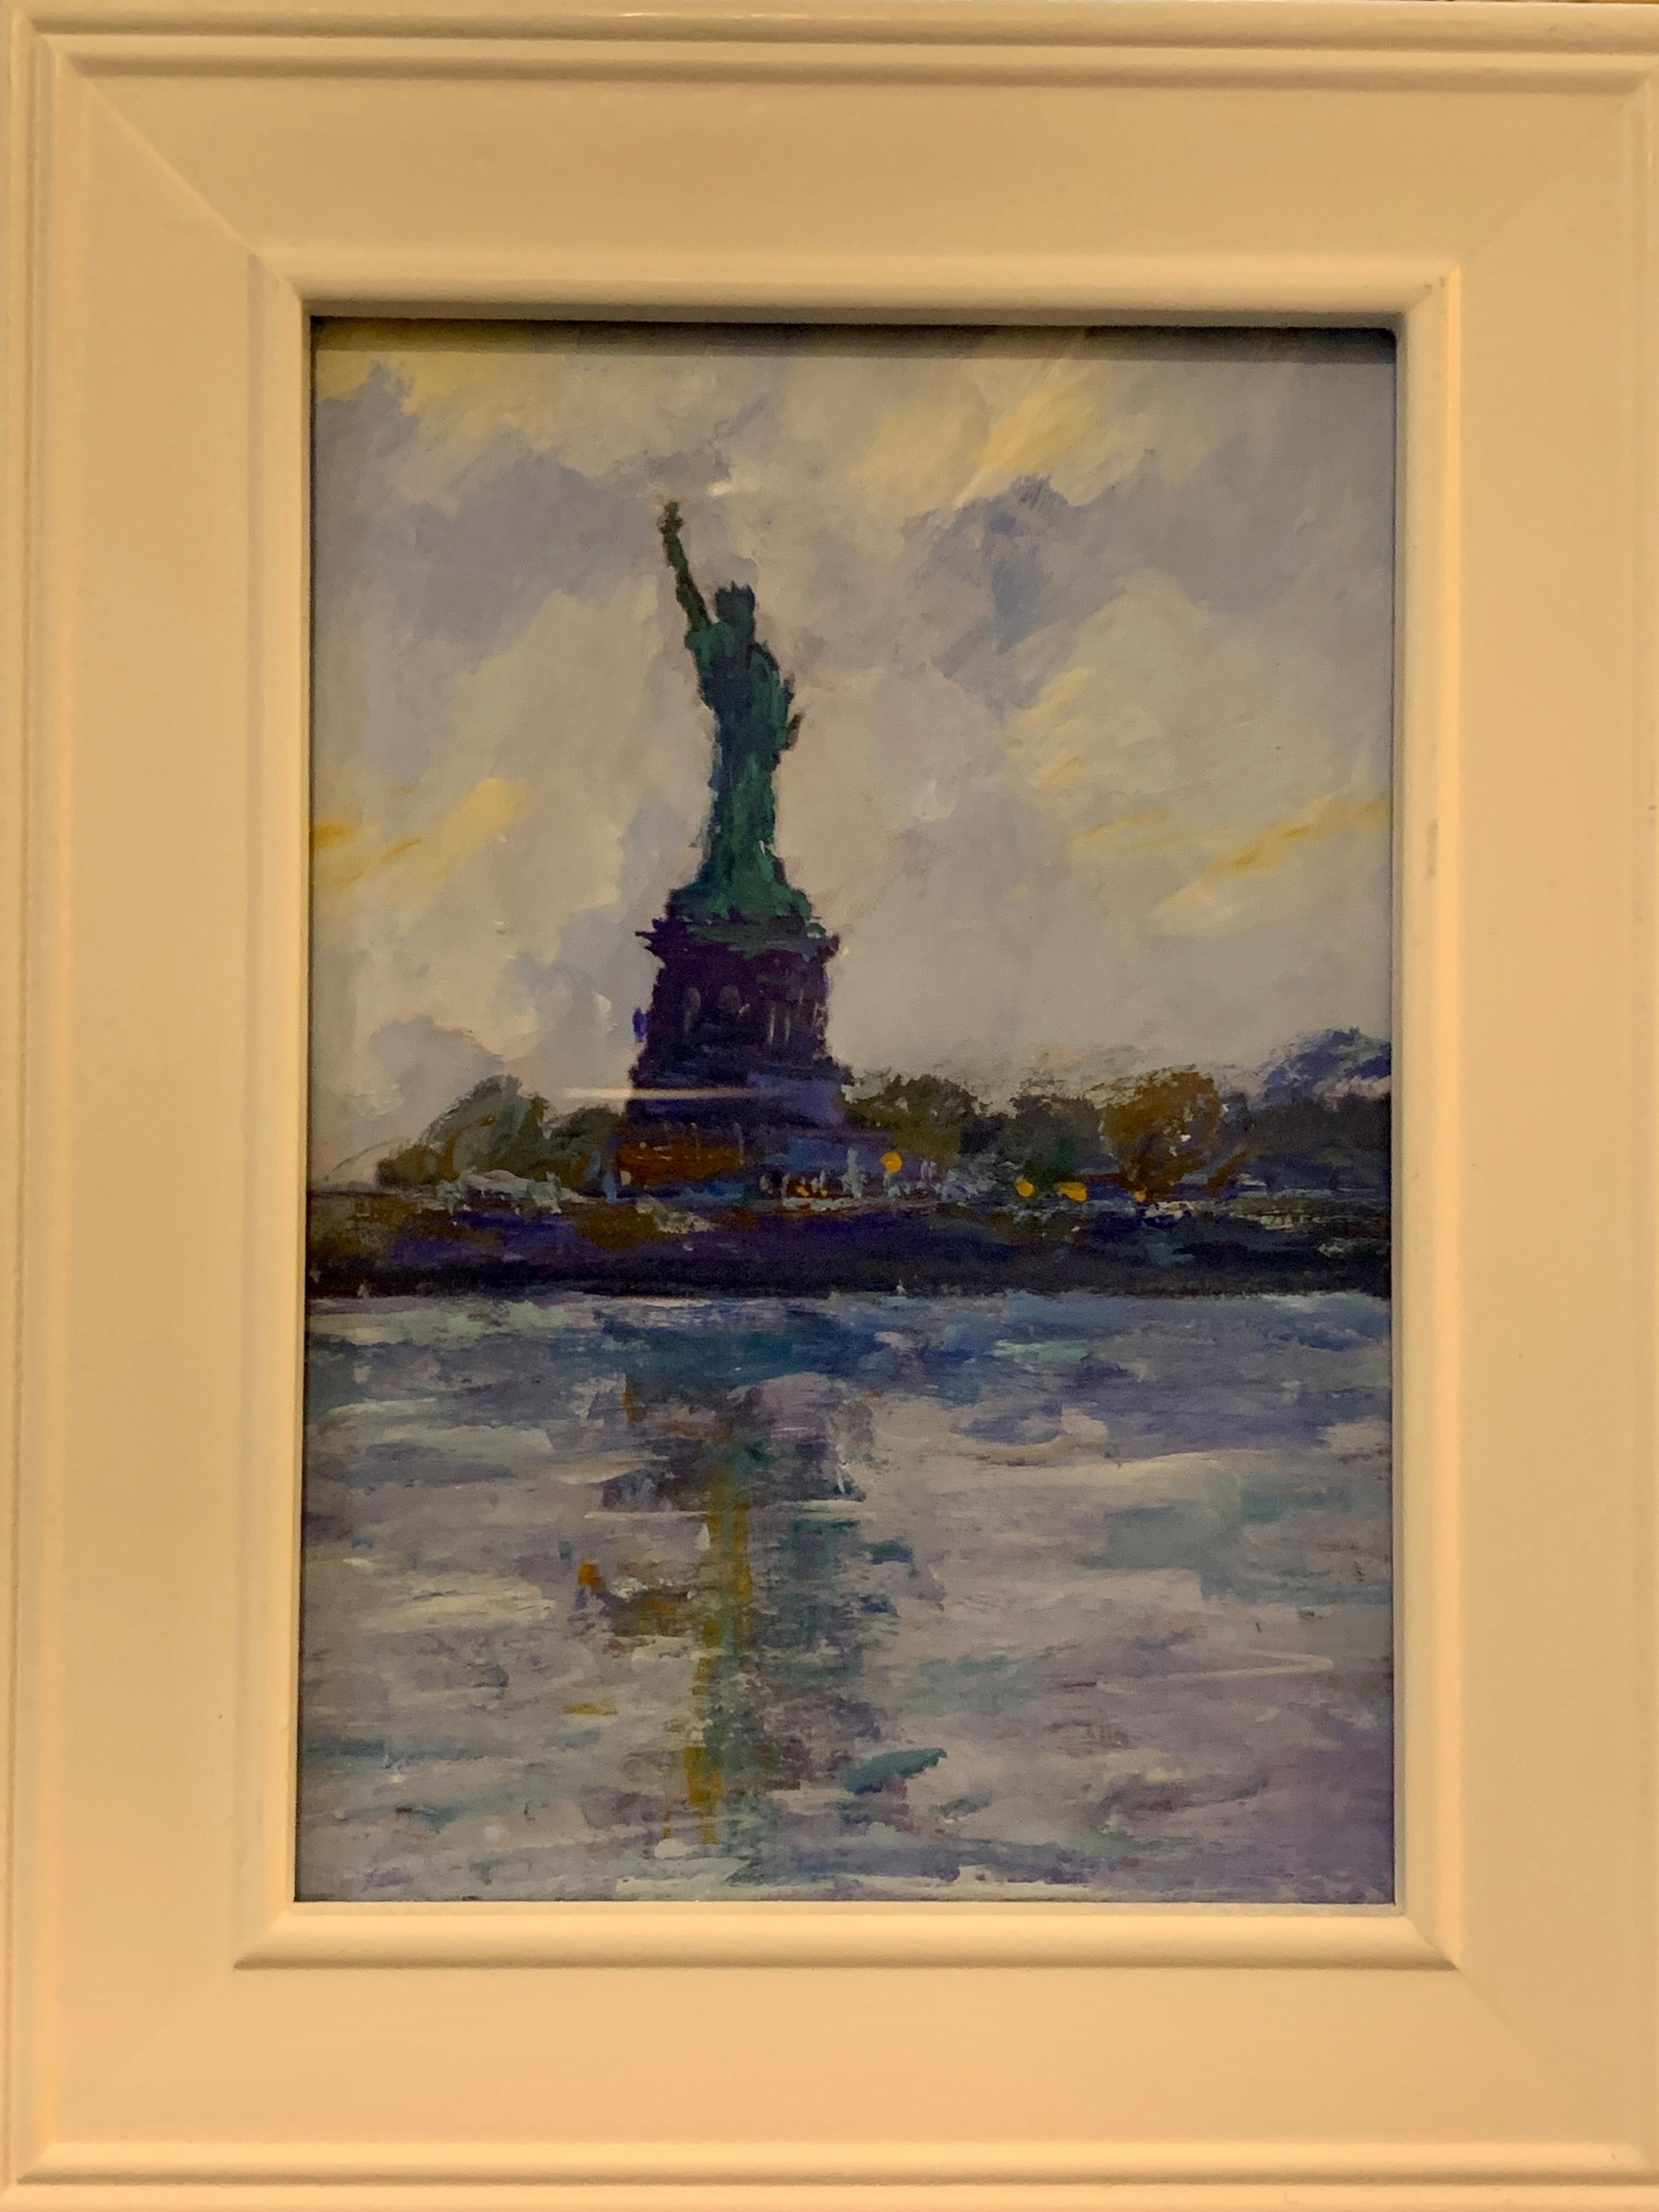 American Impressionist, sketch of The Statue of Liberty from the East River NYC - Painting by Charles Bertie Hall